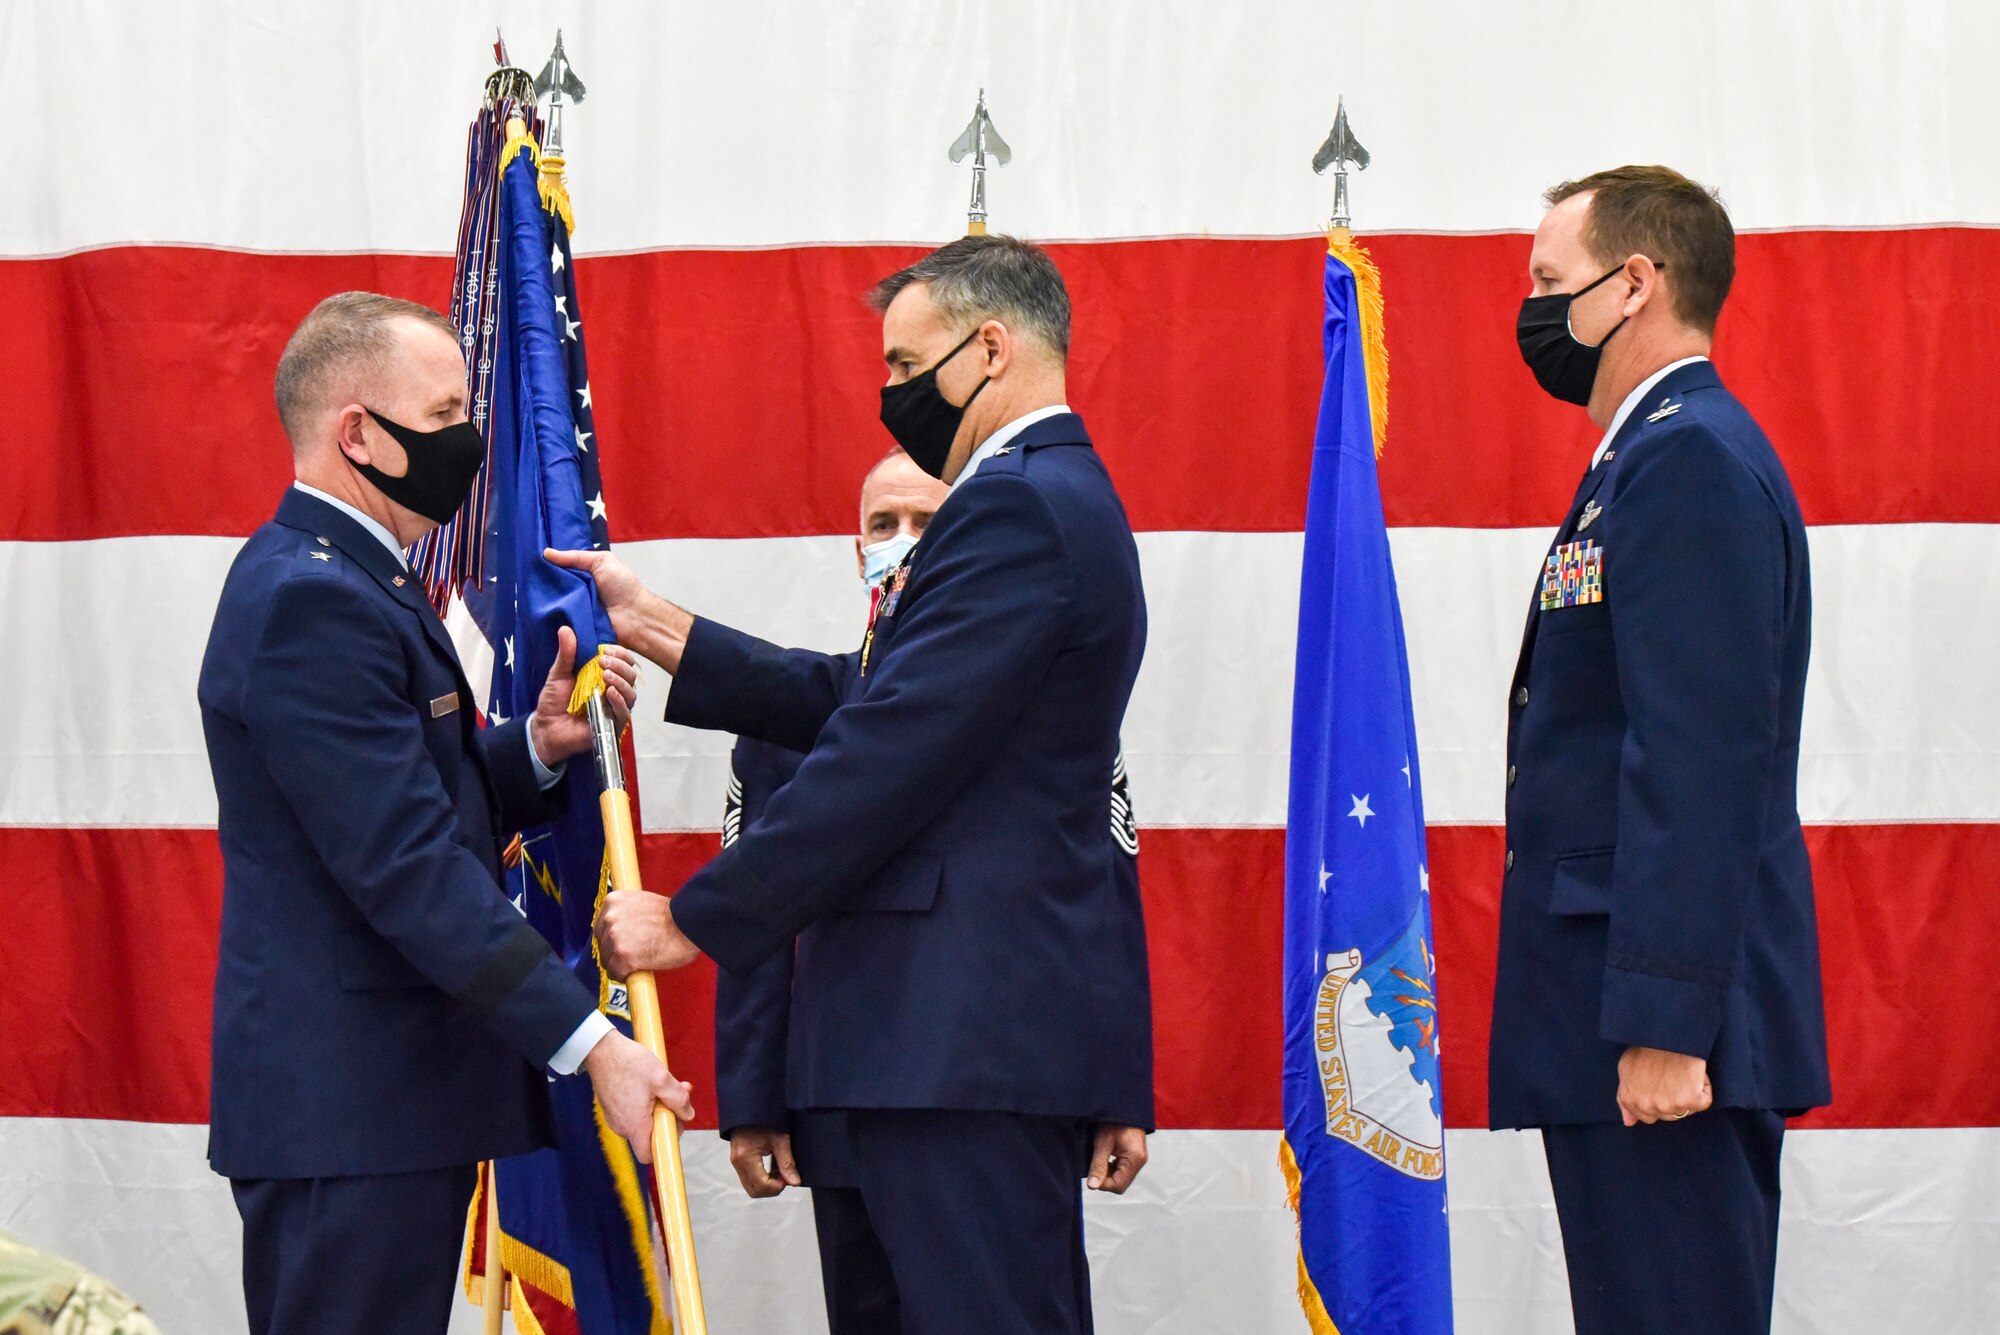 Brig. Gen. Erik Peterson, Chief of Staff, Wisconsin Air National Guard, passes the 115th Fighter Wing unit flag to Brig. Gen. David May, Wisconsin’s deputy adjutant general for Air as part of the official change of command ceremony in an aircraft hangar at the 115th Fighter Wing, Madison, Wis., Oct 3, 2020. Col. Bart Van Roo assumed command of the 115th Fighter Wing from Brig. Gen. Erik Peterson. (U.S. Air National Guard Photo by Tech. Sgt. Mary Greenwood)